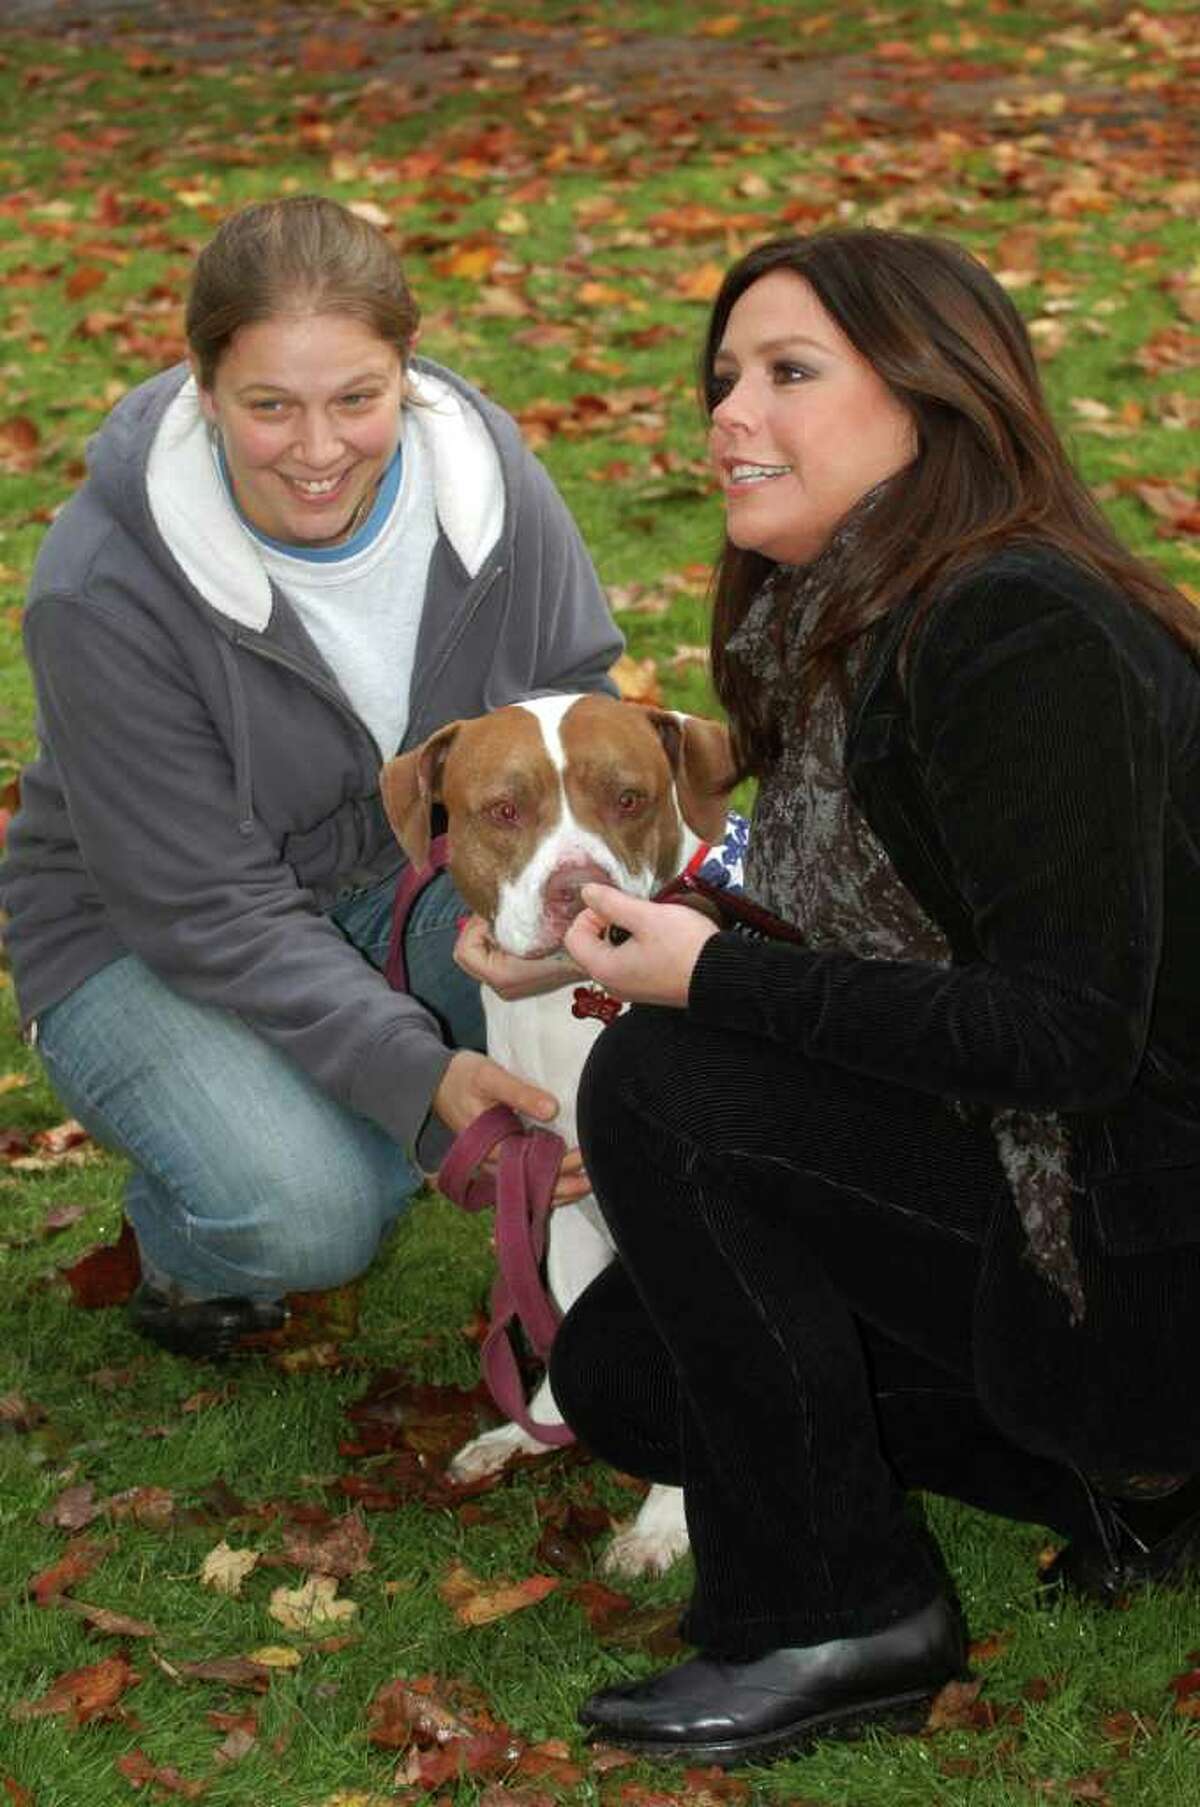 Rachael Ray stopped by the Adopt-A-Dog event on Sherman Green in Fairfield, Conn. on Friday November 5, 2010. After posing with Kristen Alouisa and 61/2 year old Tyke, one of the dogs up for adoption, Rachael made a $7,500 donation to the cause before heading over to Borders Bookstore for a book signing.